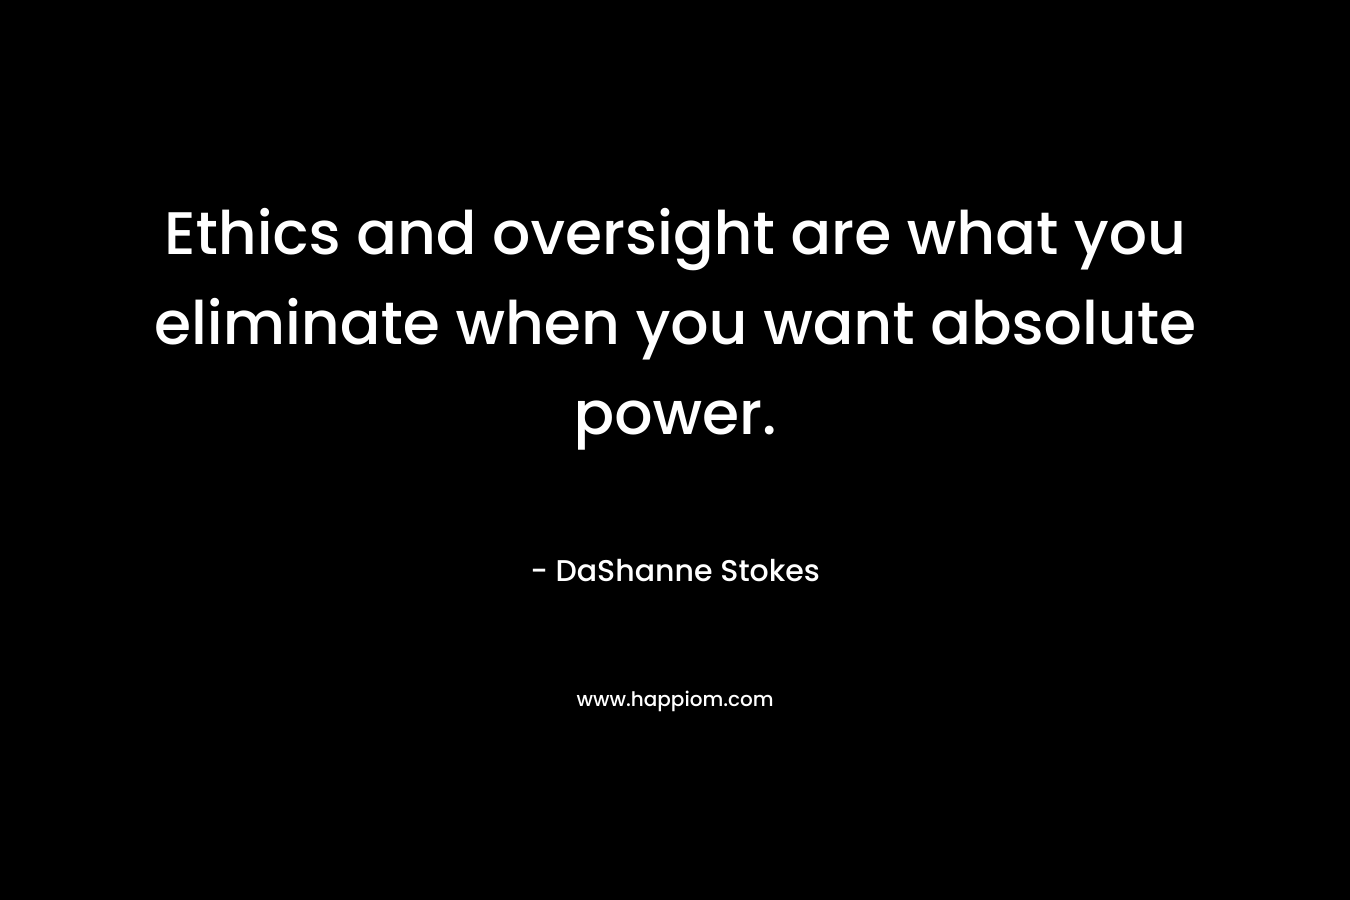 Ethics and oversight are what you eliminate when you want absolute power.